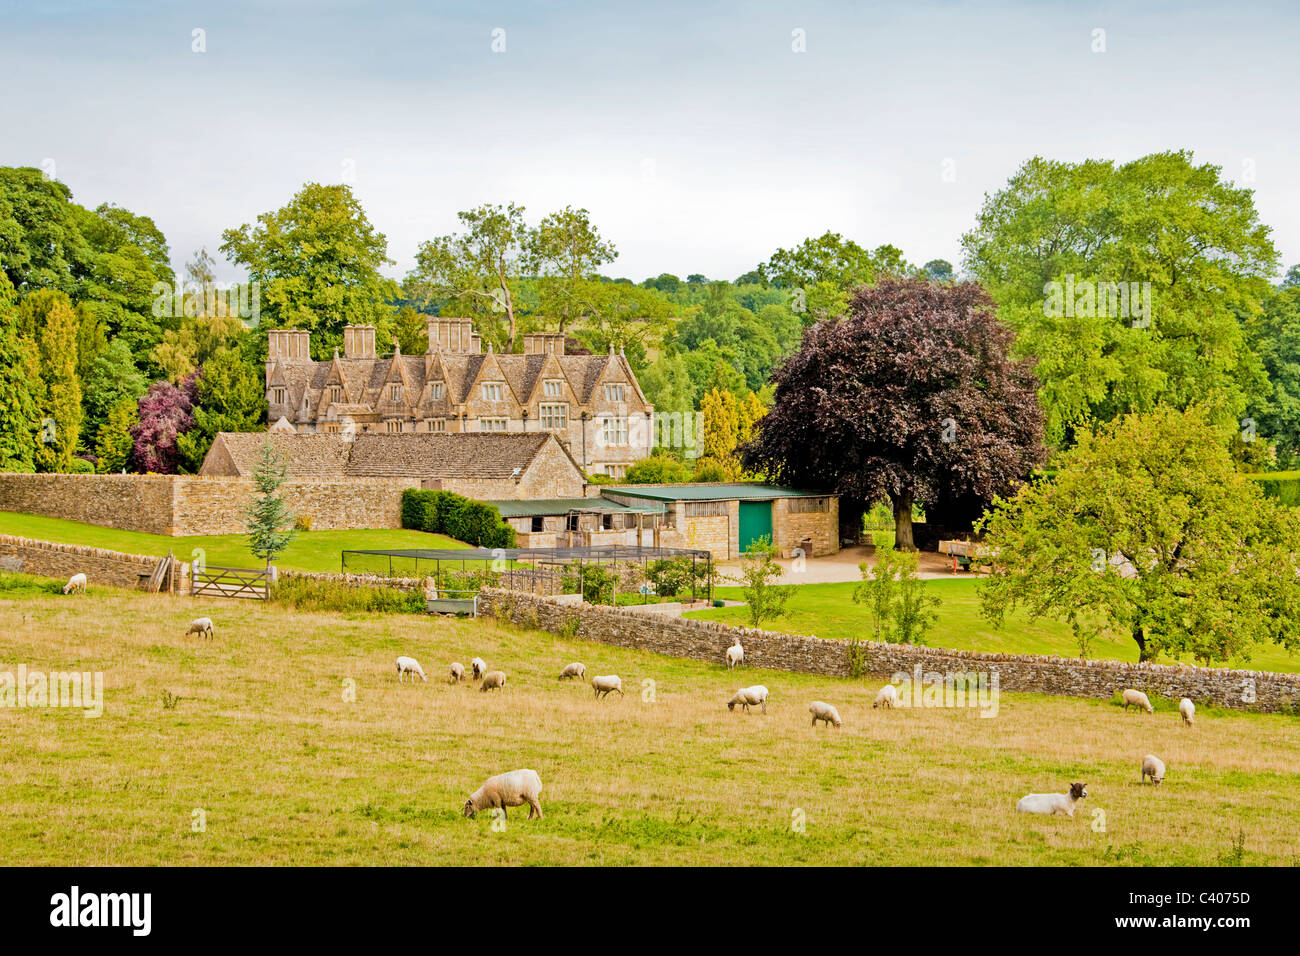 Great Britain, Europe, England, Cotswolds, Upper Slaughter, meadow, sheep, house, home, trees Stock Photo